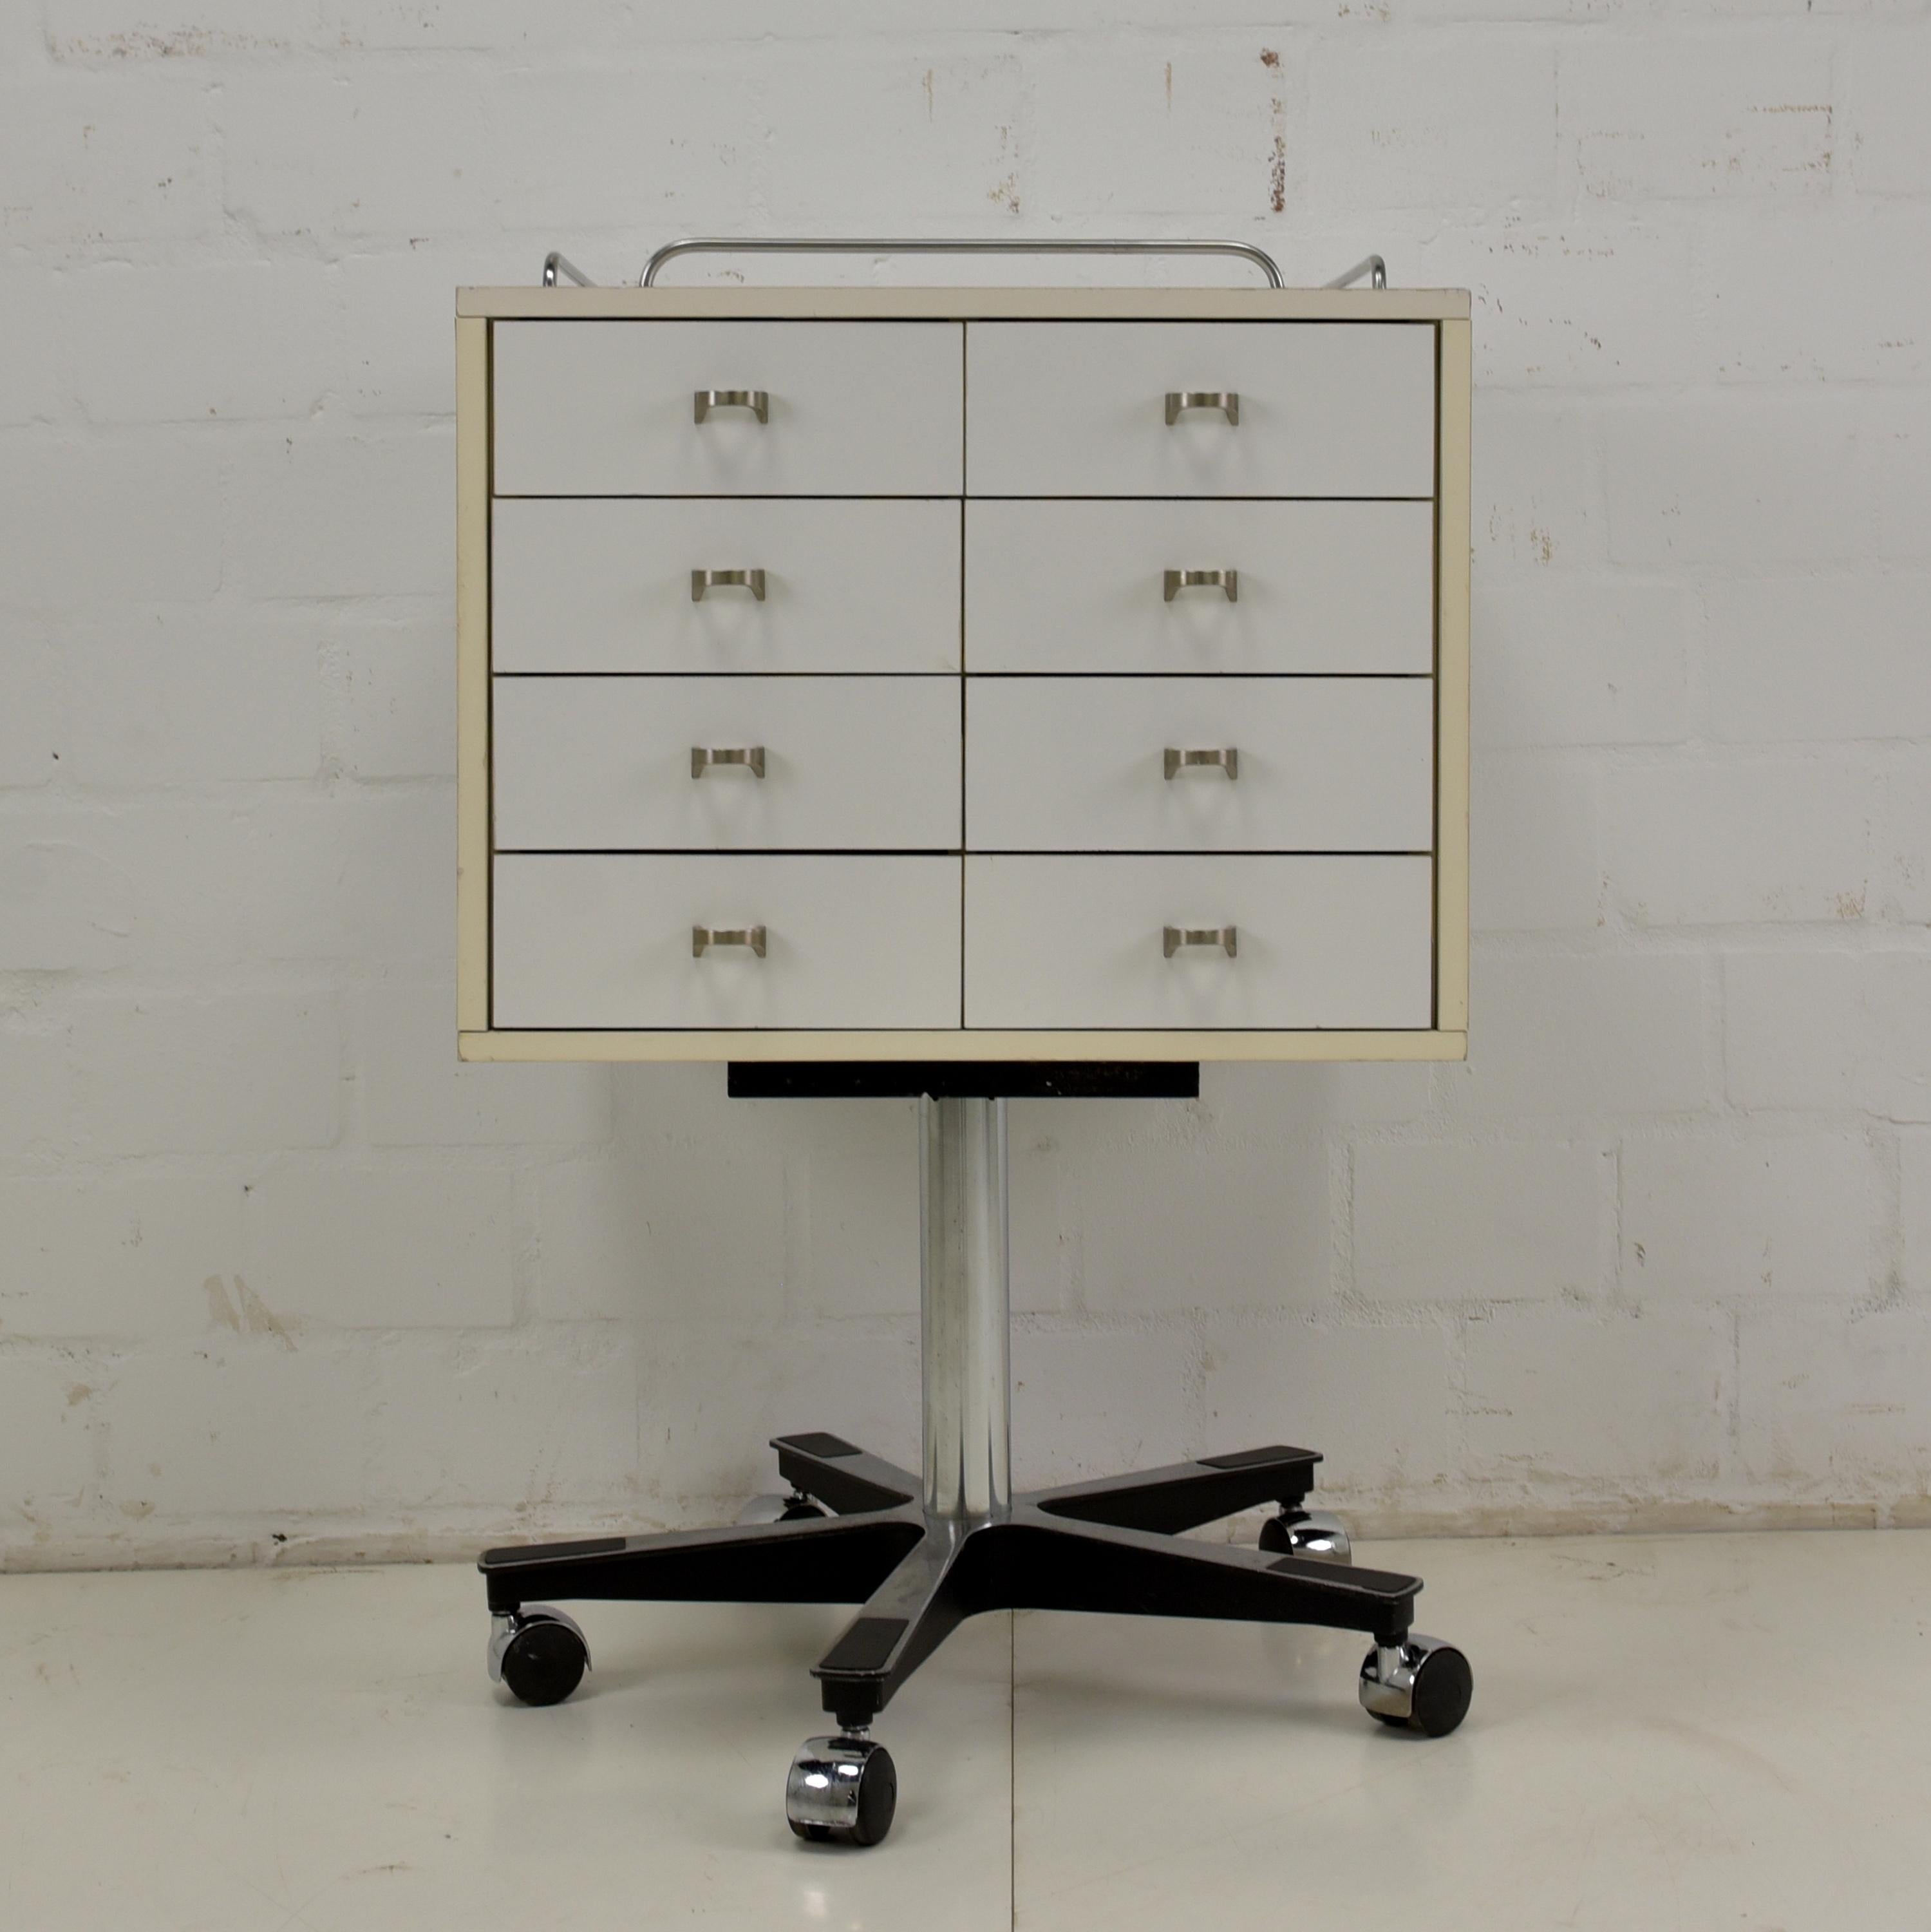 Small doctor's table retro vintage white rollable side table around 1980

Features:
Rollable model with shelves and 8 drawers
Rare and stylish model

Additional information:
Dimensions: 55 W x 55 D x 86.5 H cm
Condition: Good.